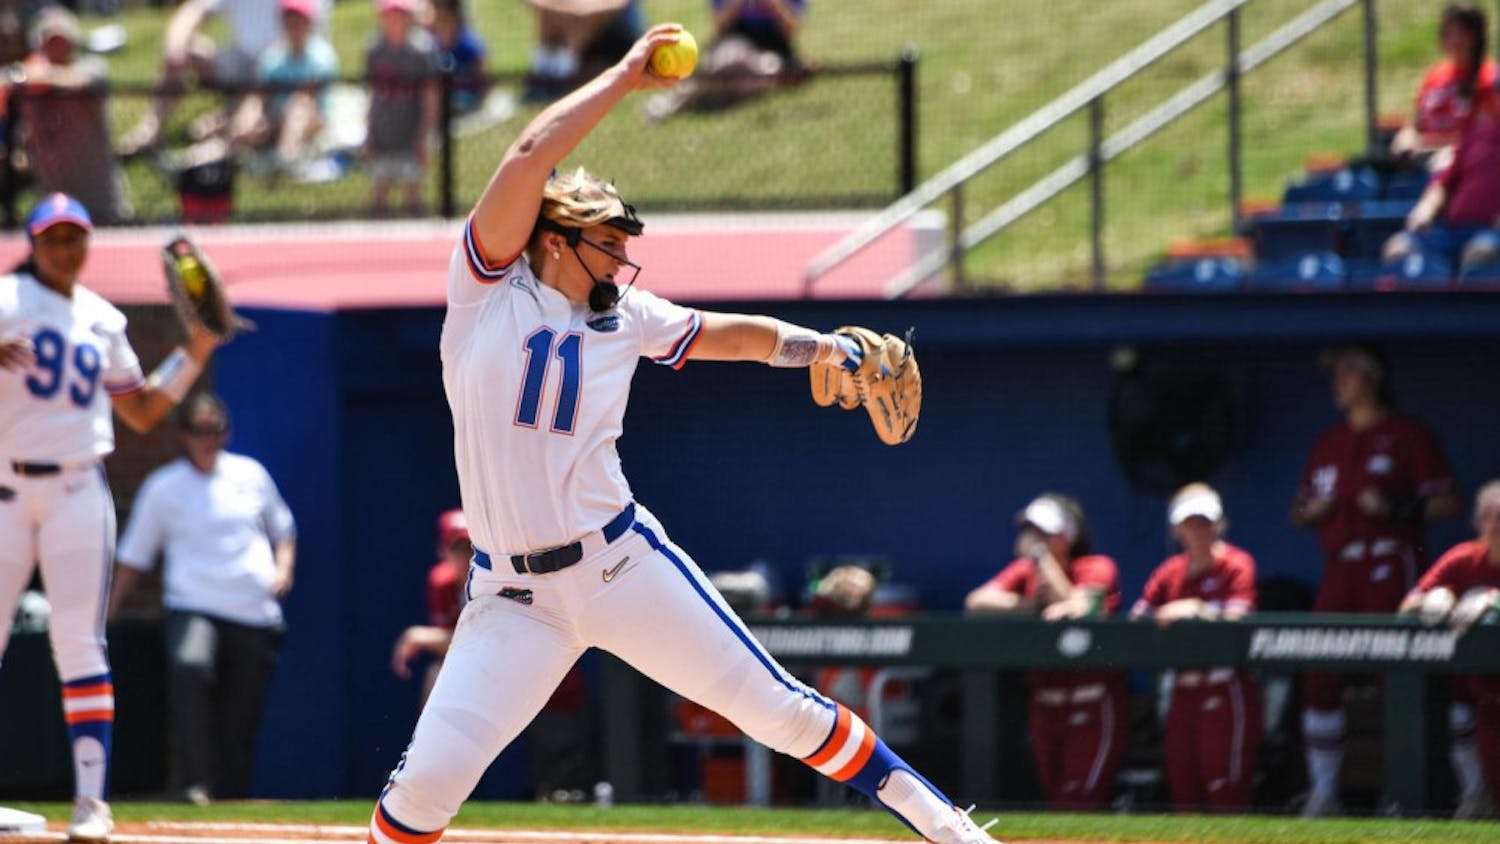 Pitcher Kelly Barnhill pitched all seven innings and struck out 11 batters in UF's win over Auburn on Friday.